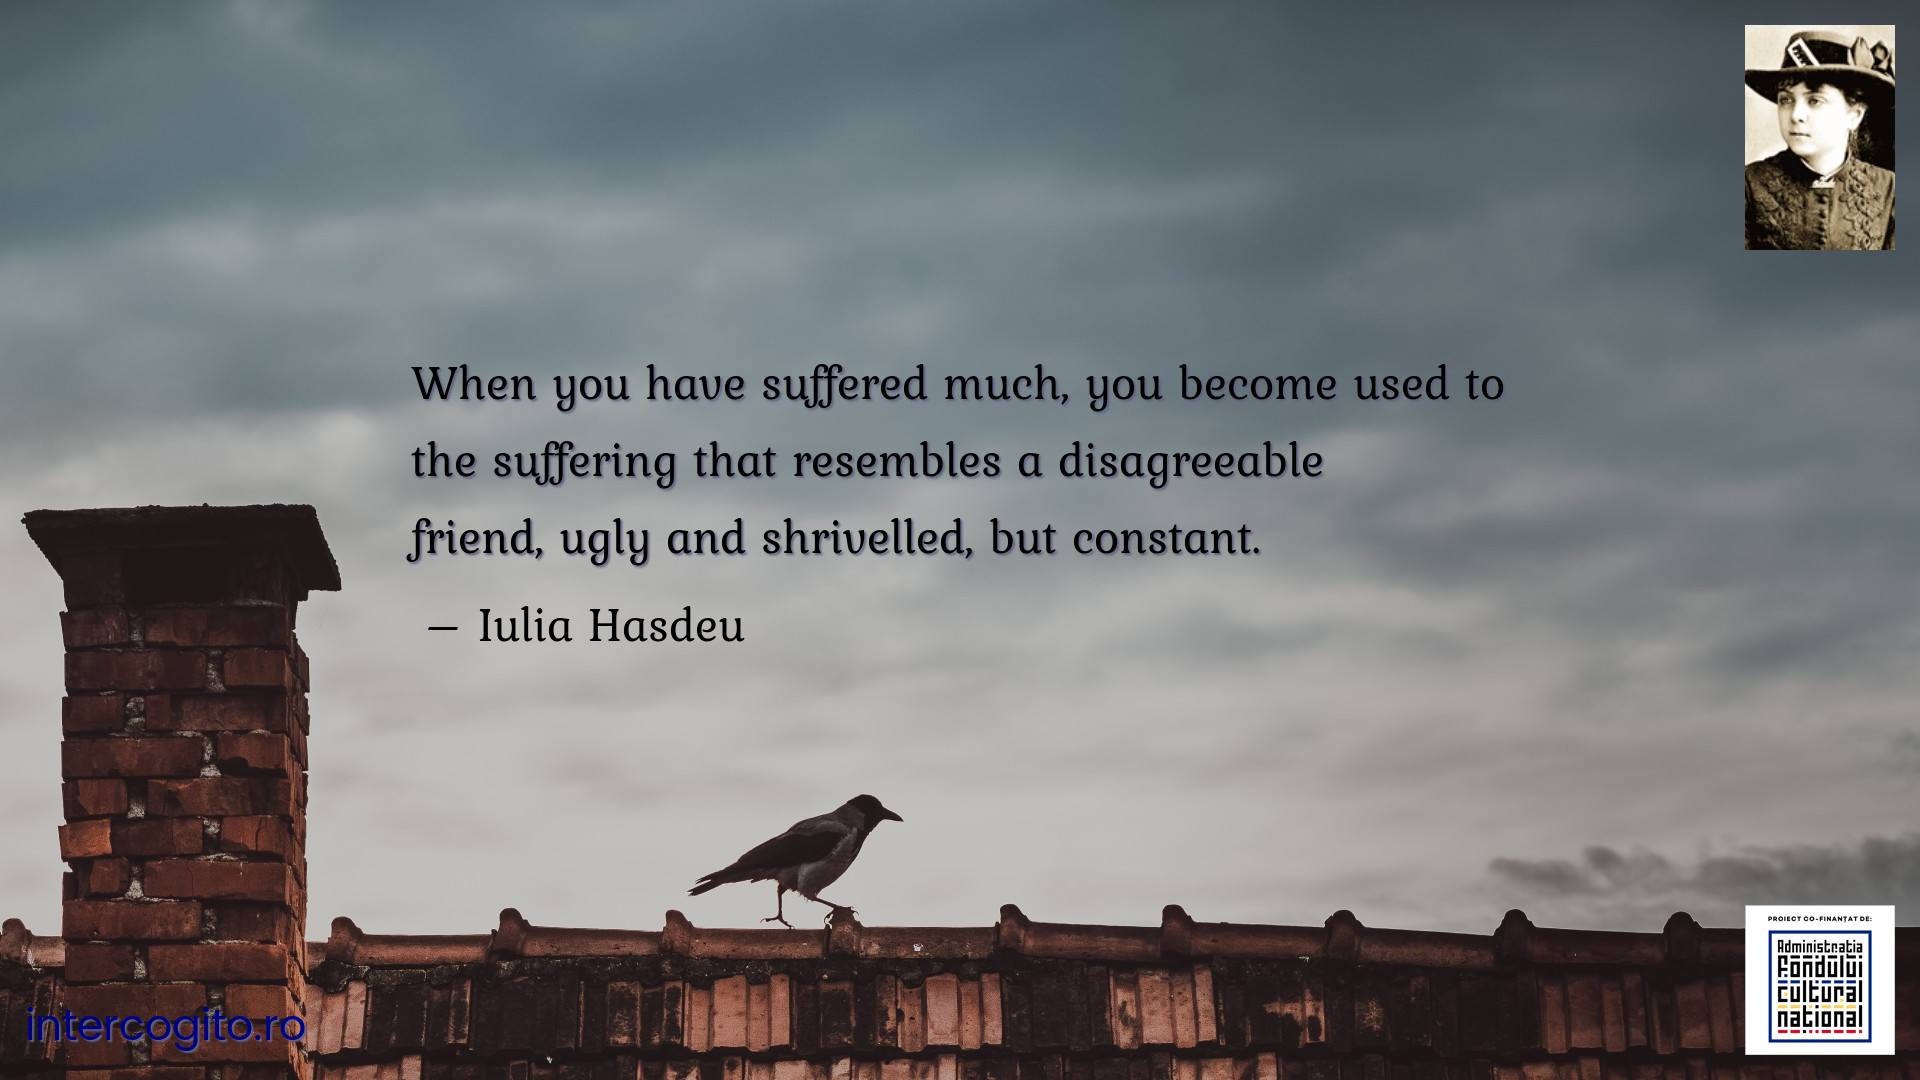 When you have suffered much, you become used to the suffering that resembles a disagreeable friend, ugly and shrivelled, but constant.